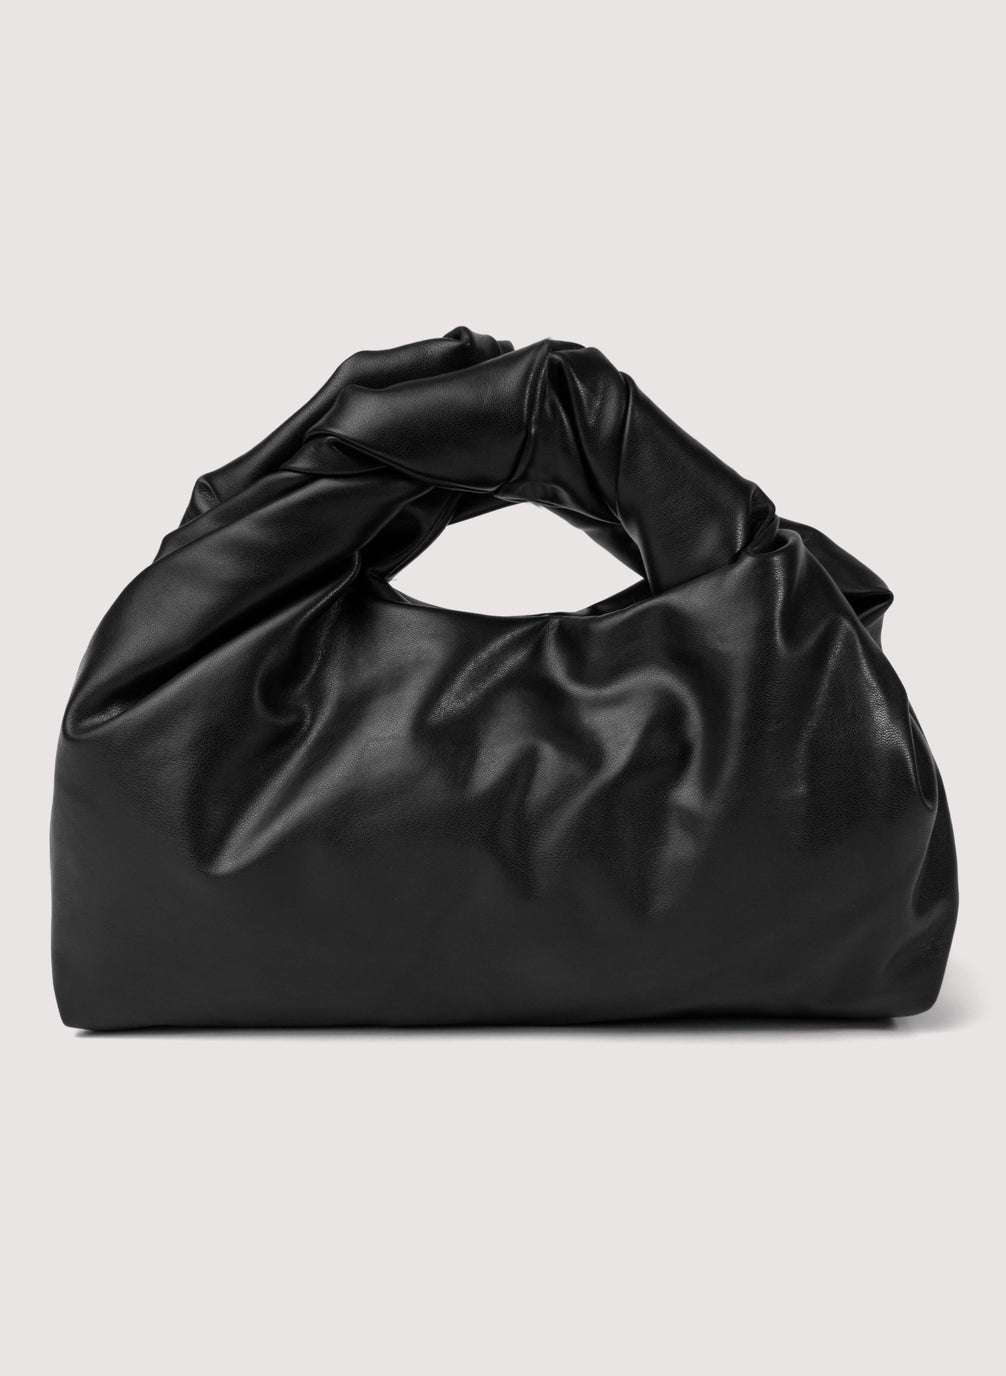 Vegan Leather Bags: Everything You Need to Know